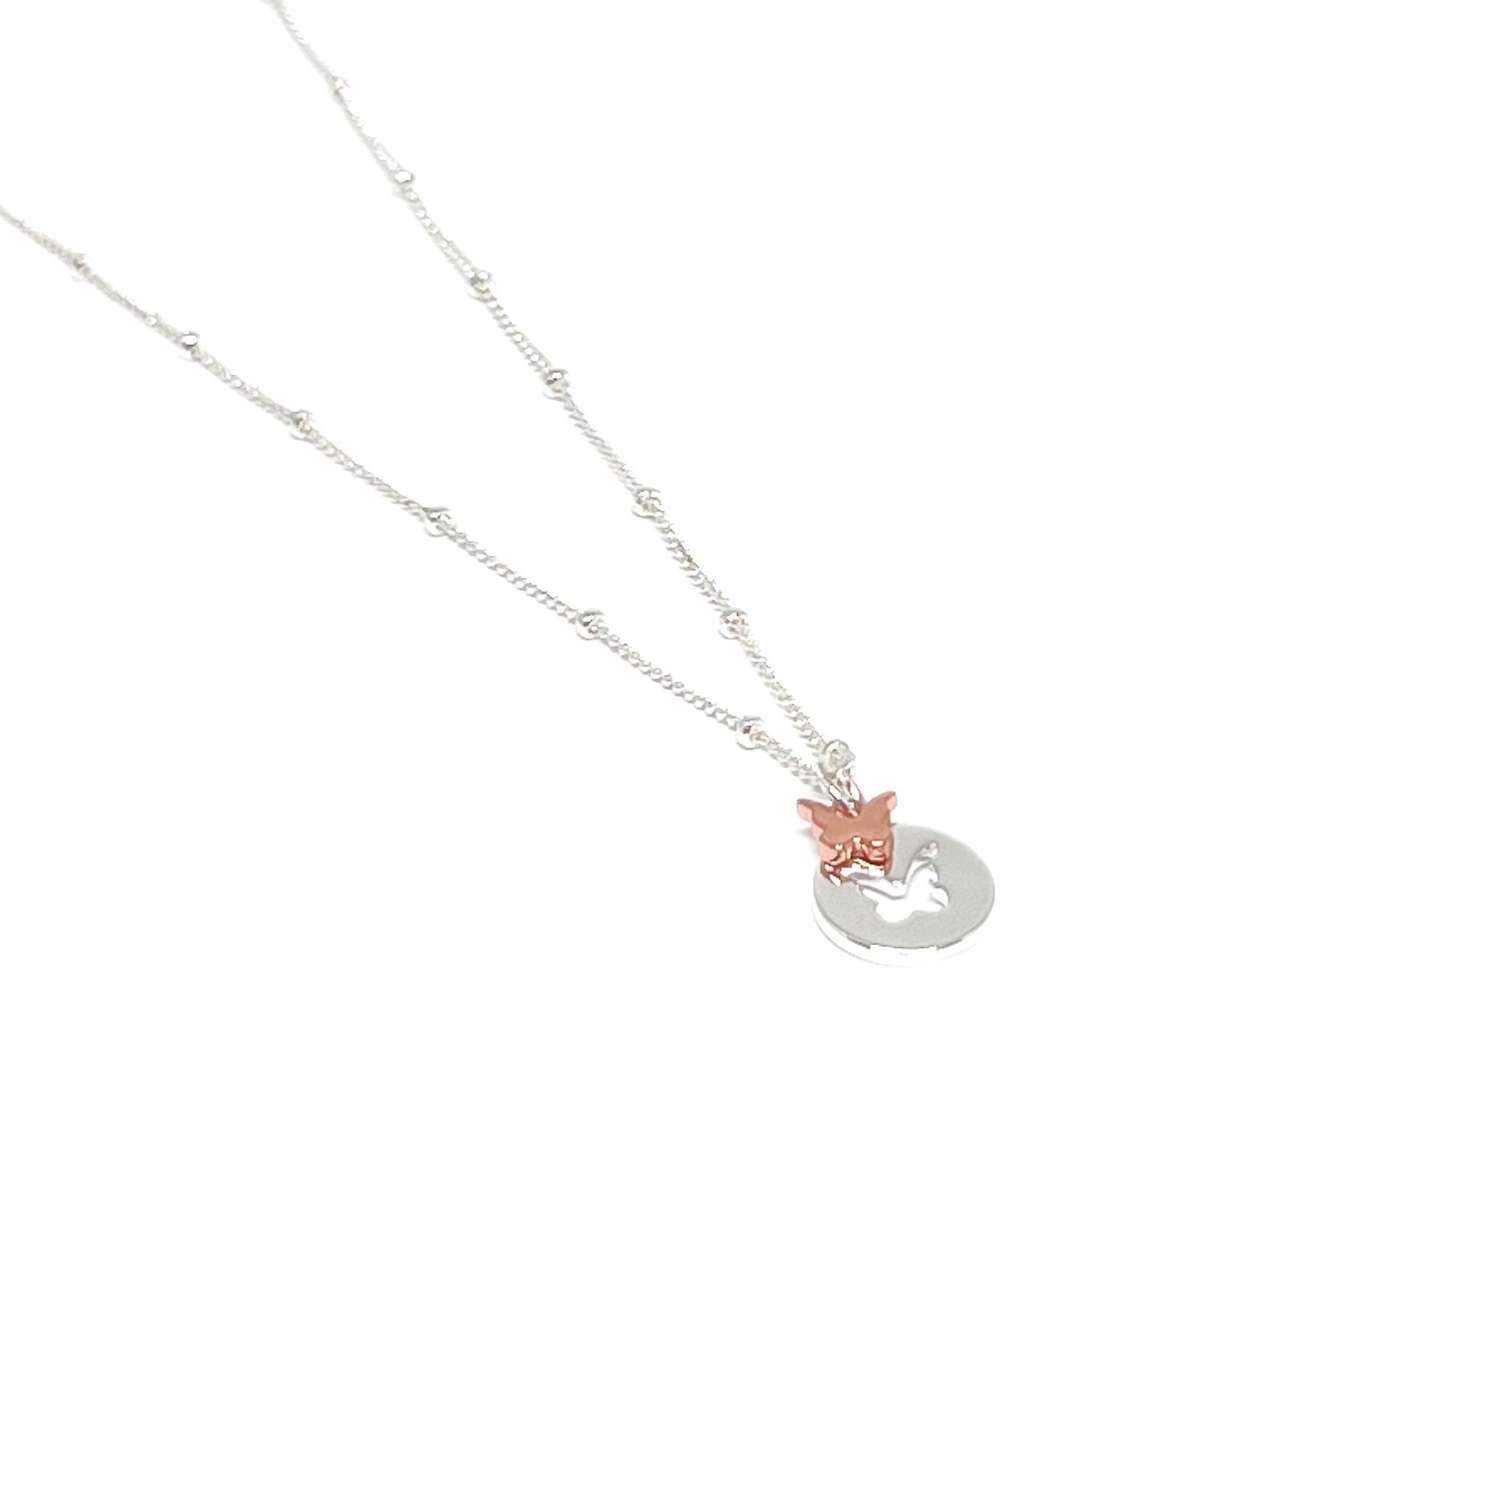 Tula Butterfly Necklace - Rose Gold